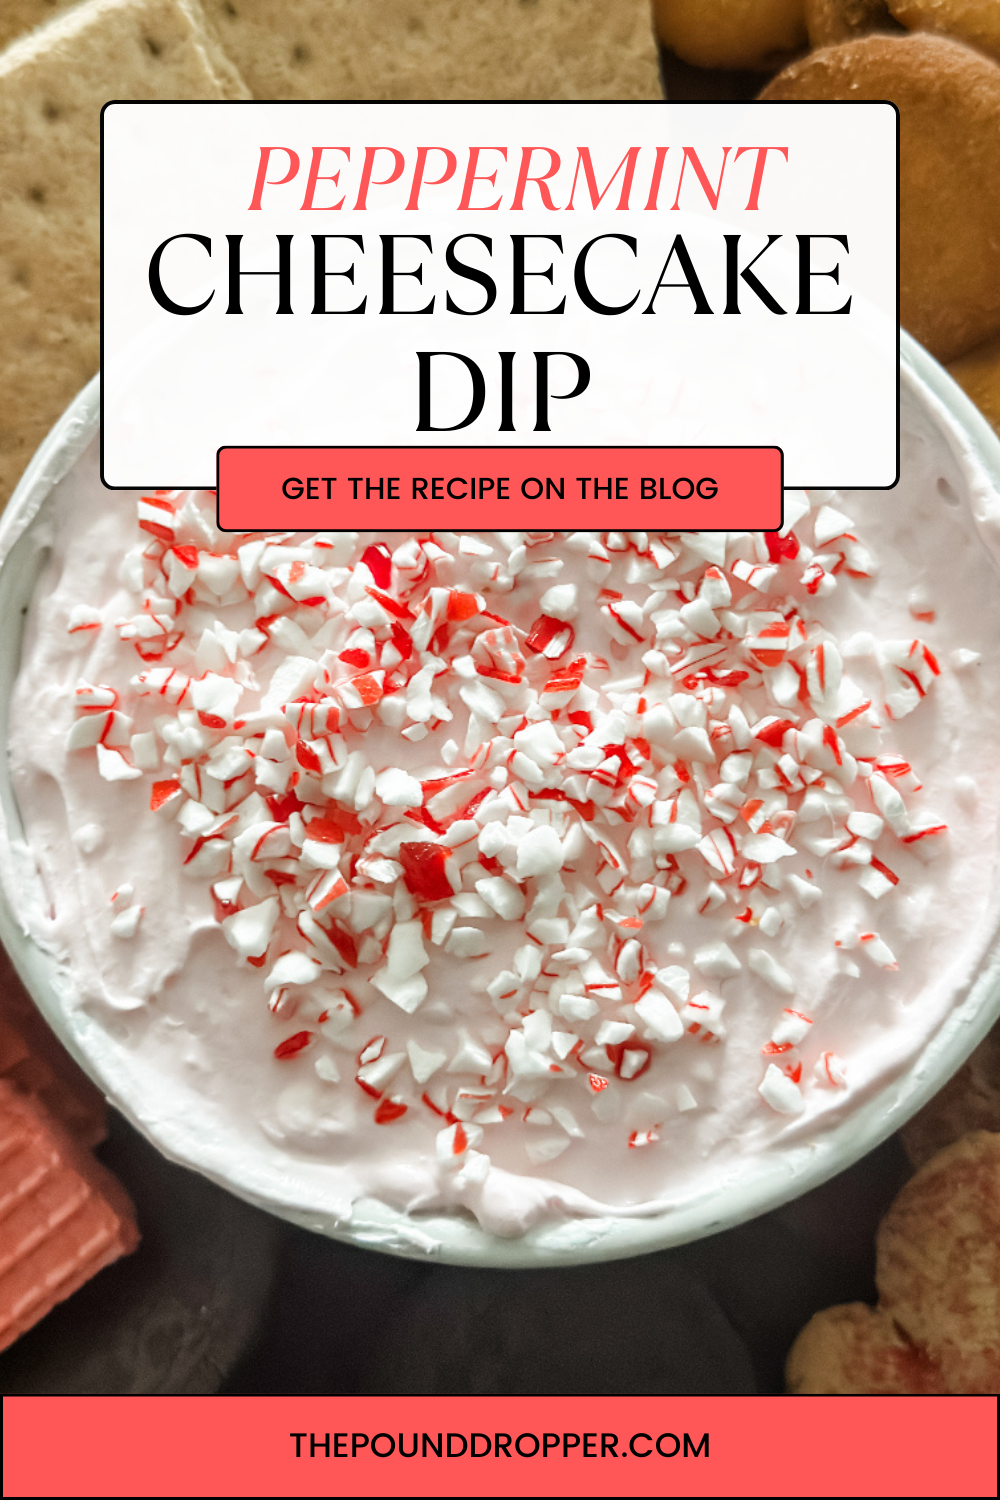 This Peppermint Cheesecake Dip is an easy no bake dessert dip that is perfect for the holidays! This Peppermint Cheesecake Dip will be a festive addition to your holiday party spread! via @pounddropper